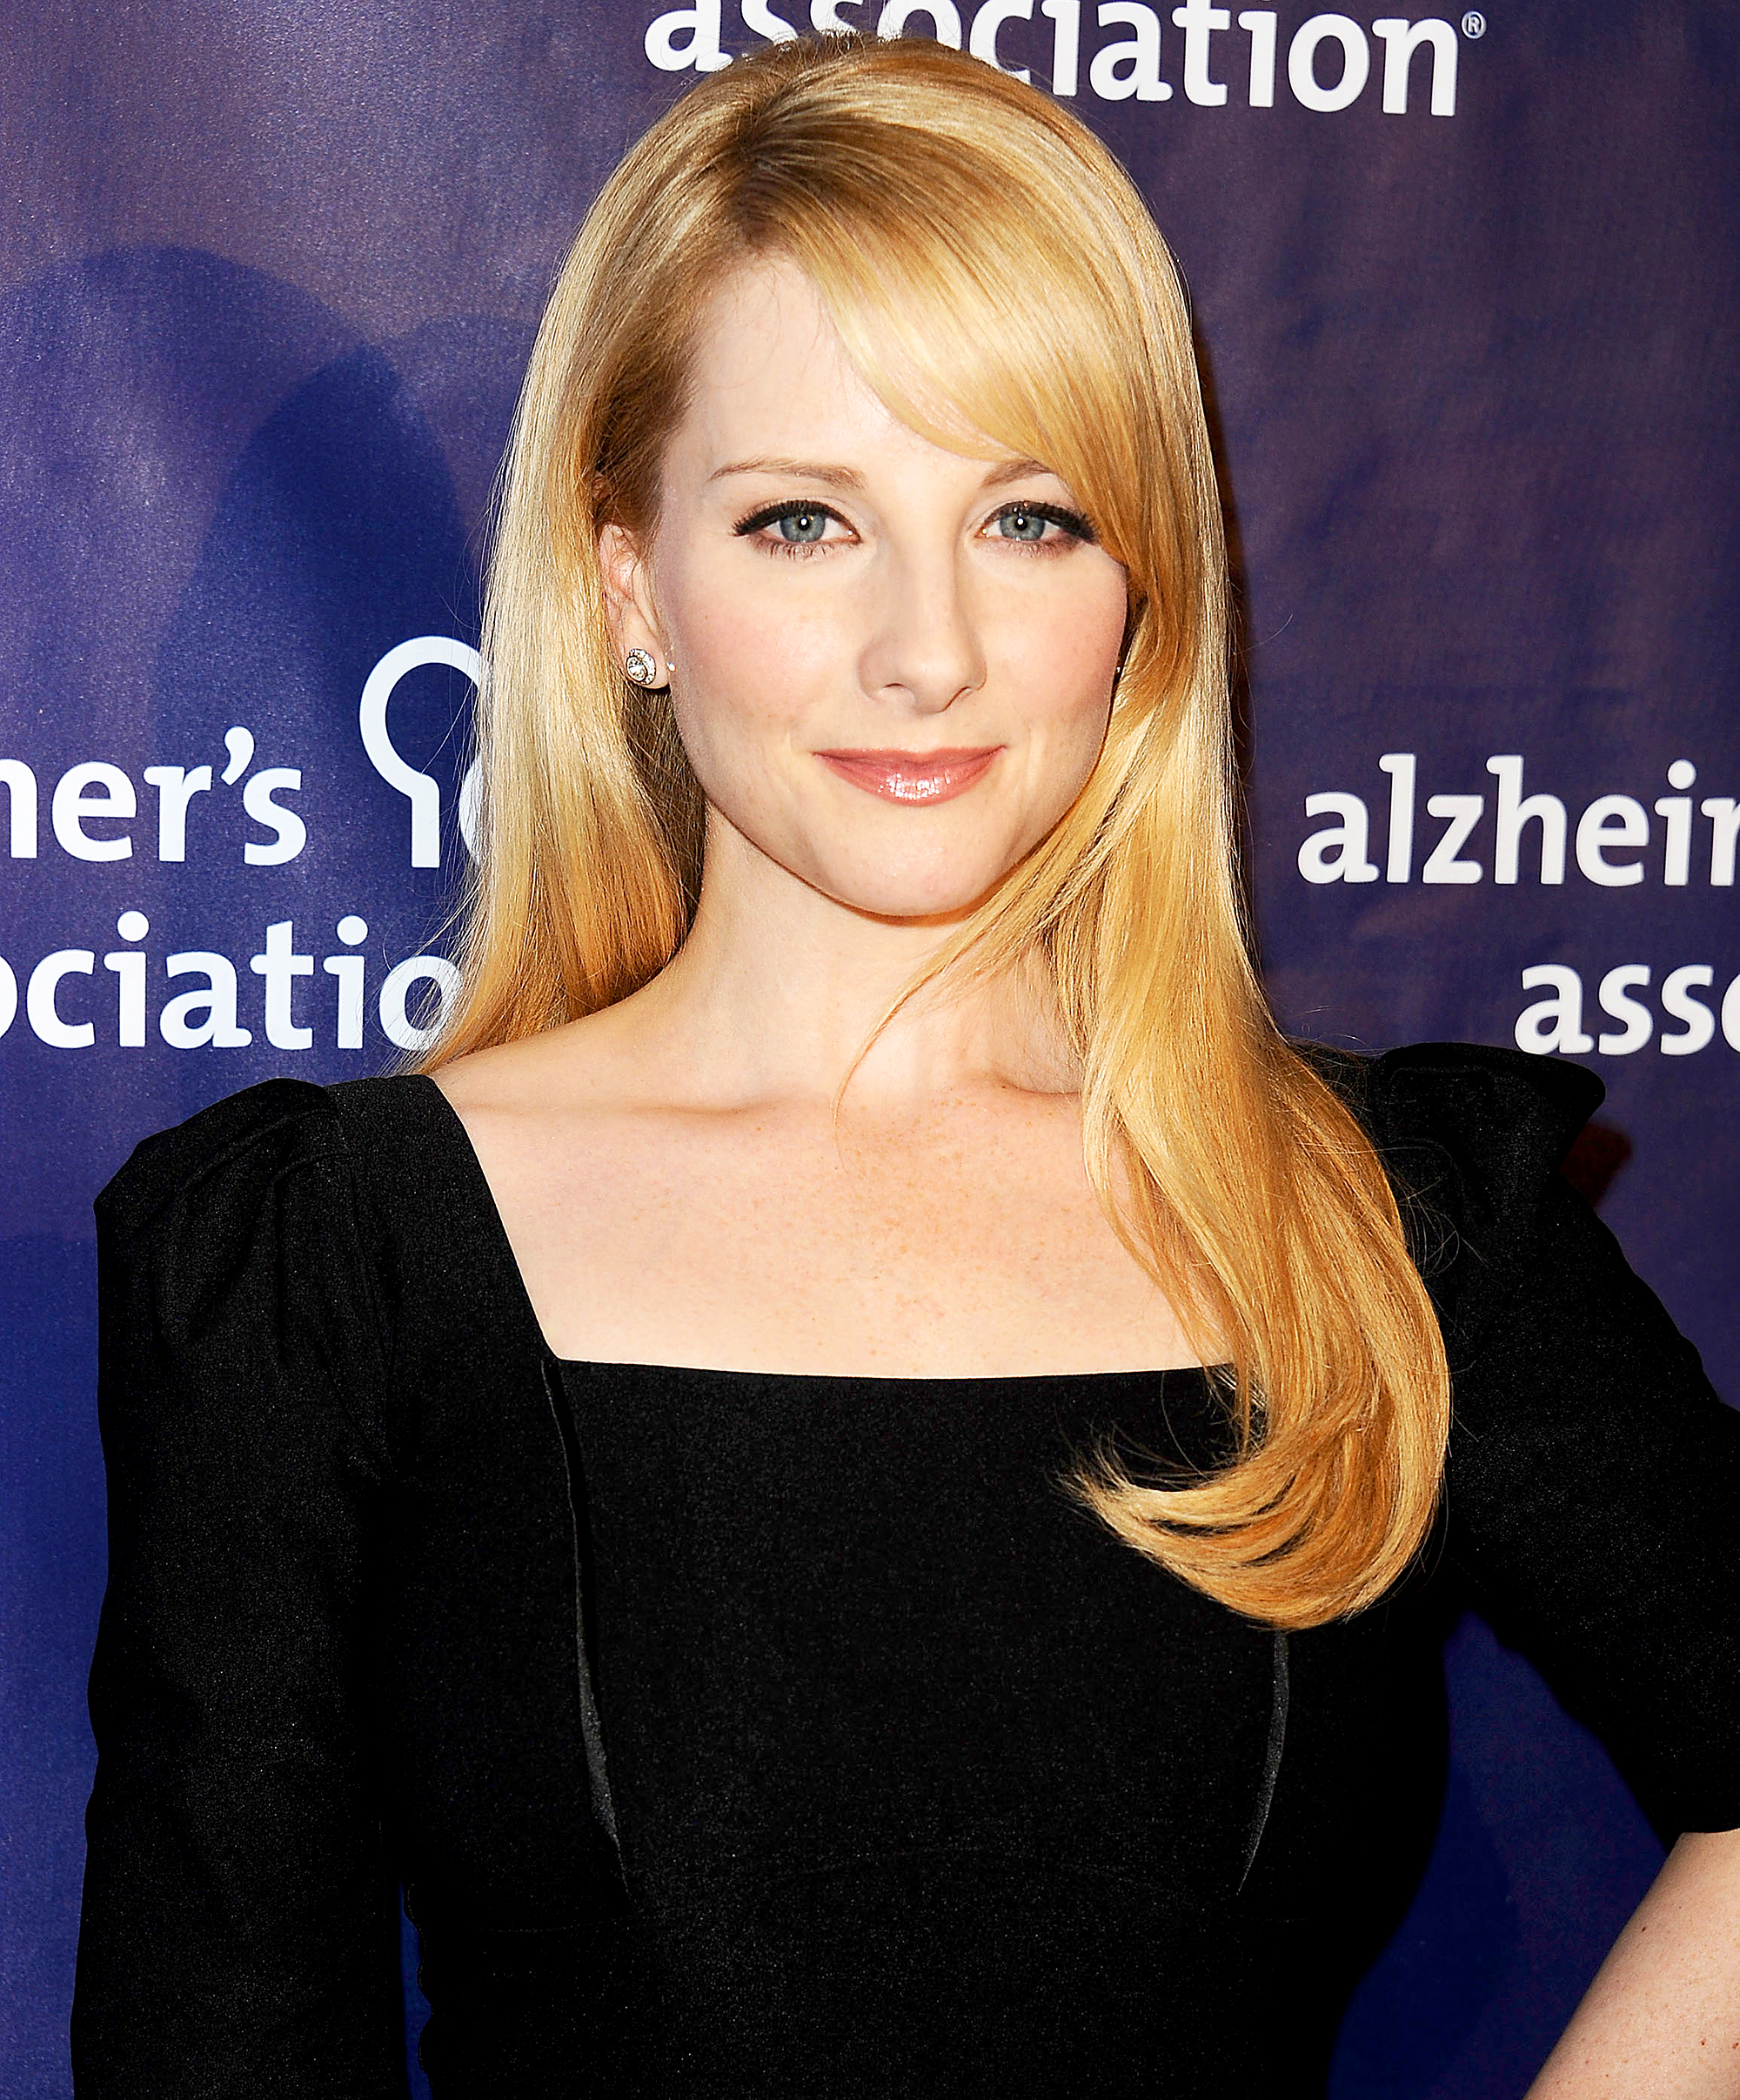 Melissa Rauch Lesbian - Big Bang Theory' Star Melissa Rauch Is Pregnant After Suffering Miscarriage